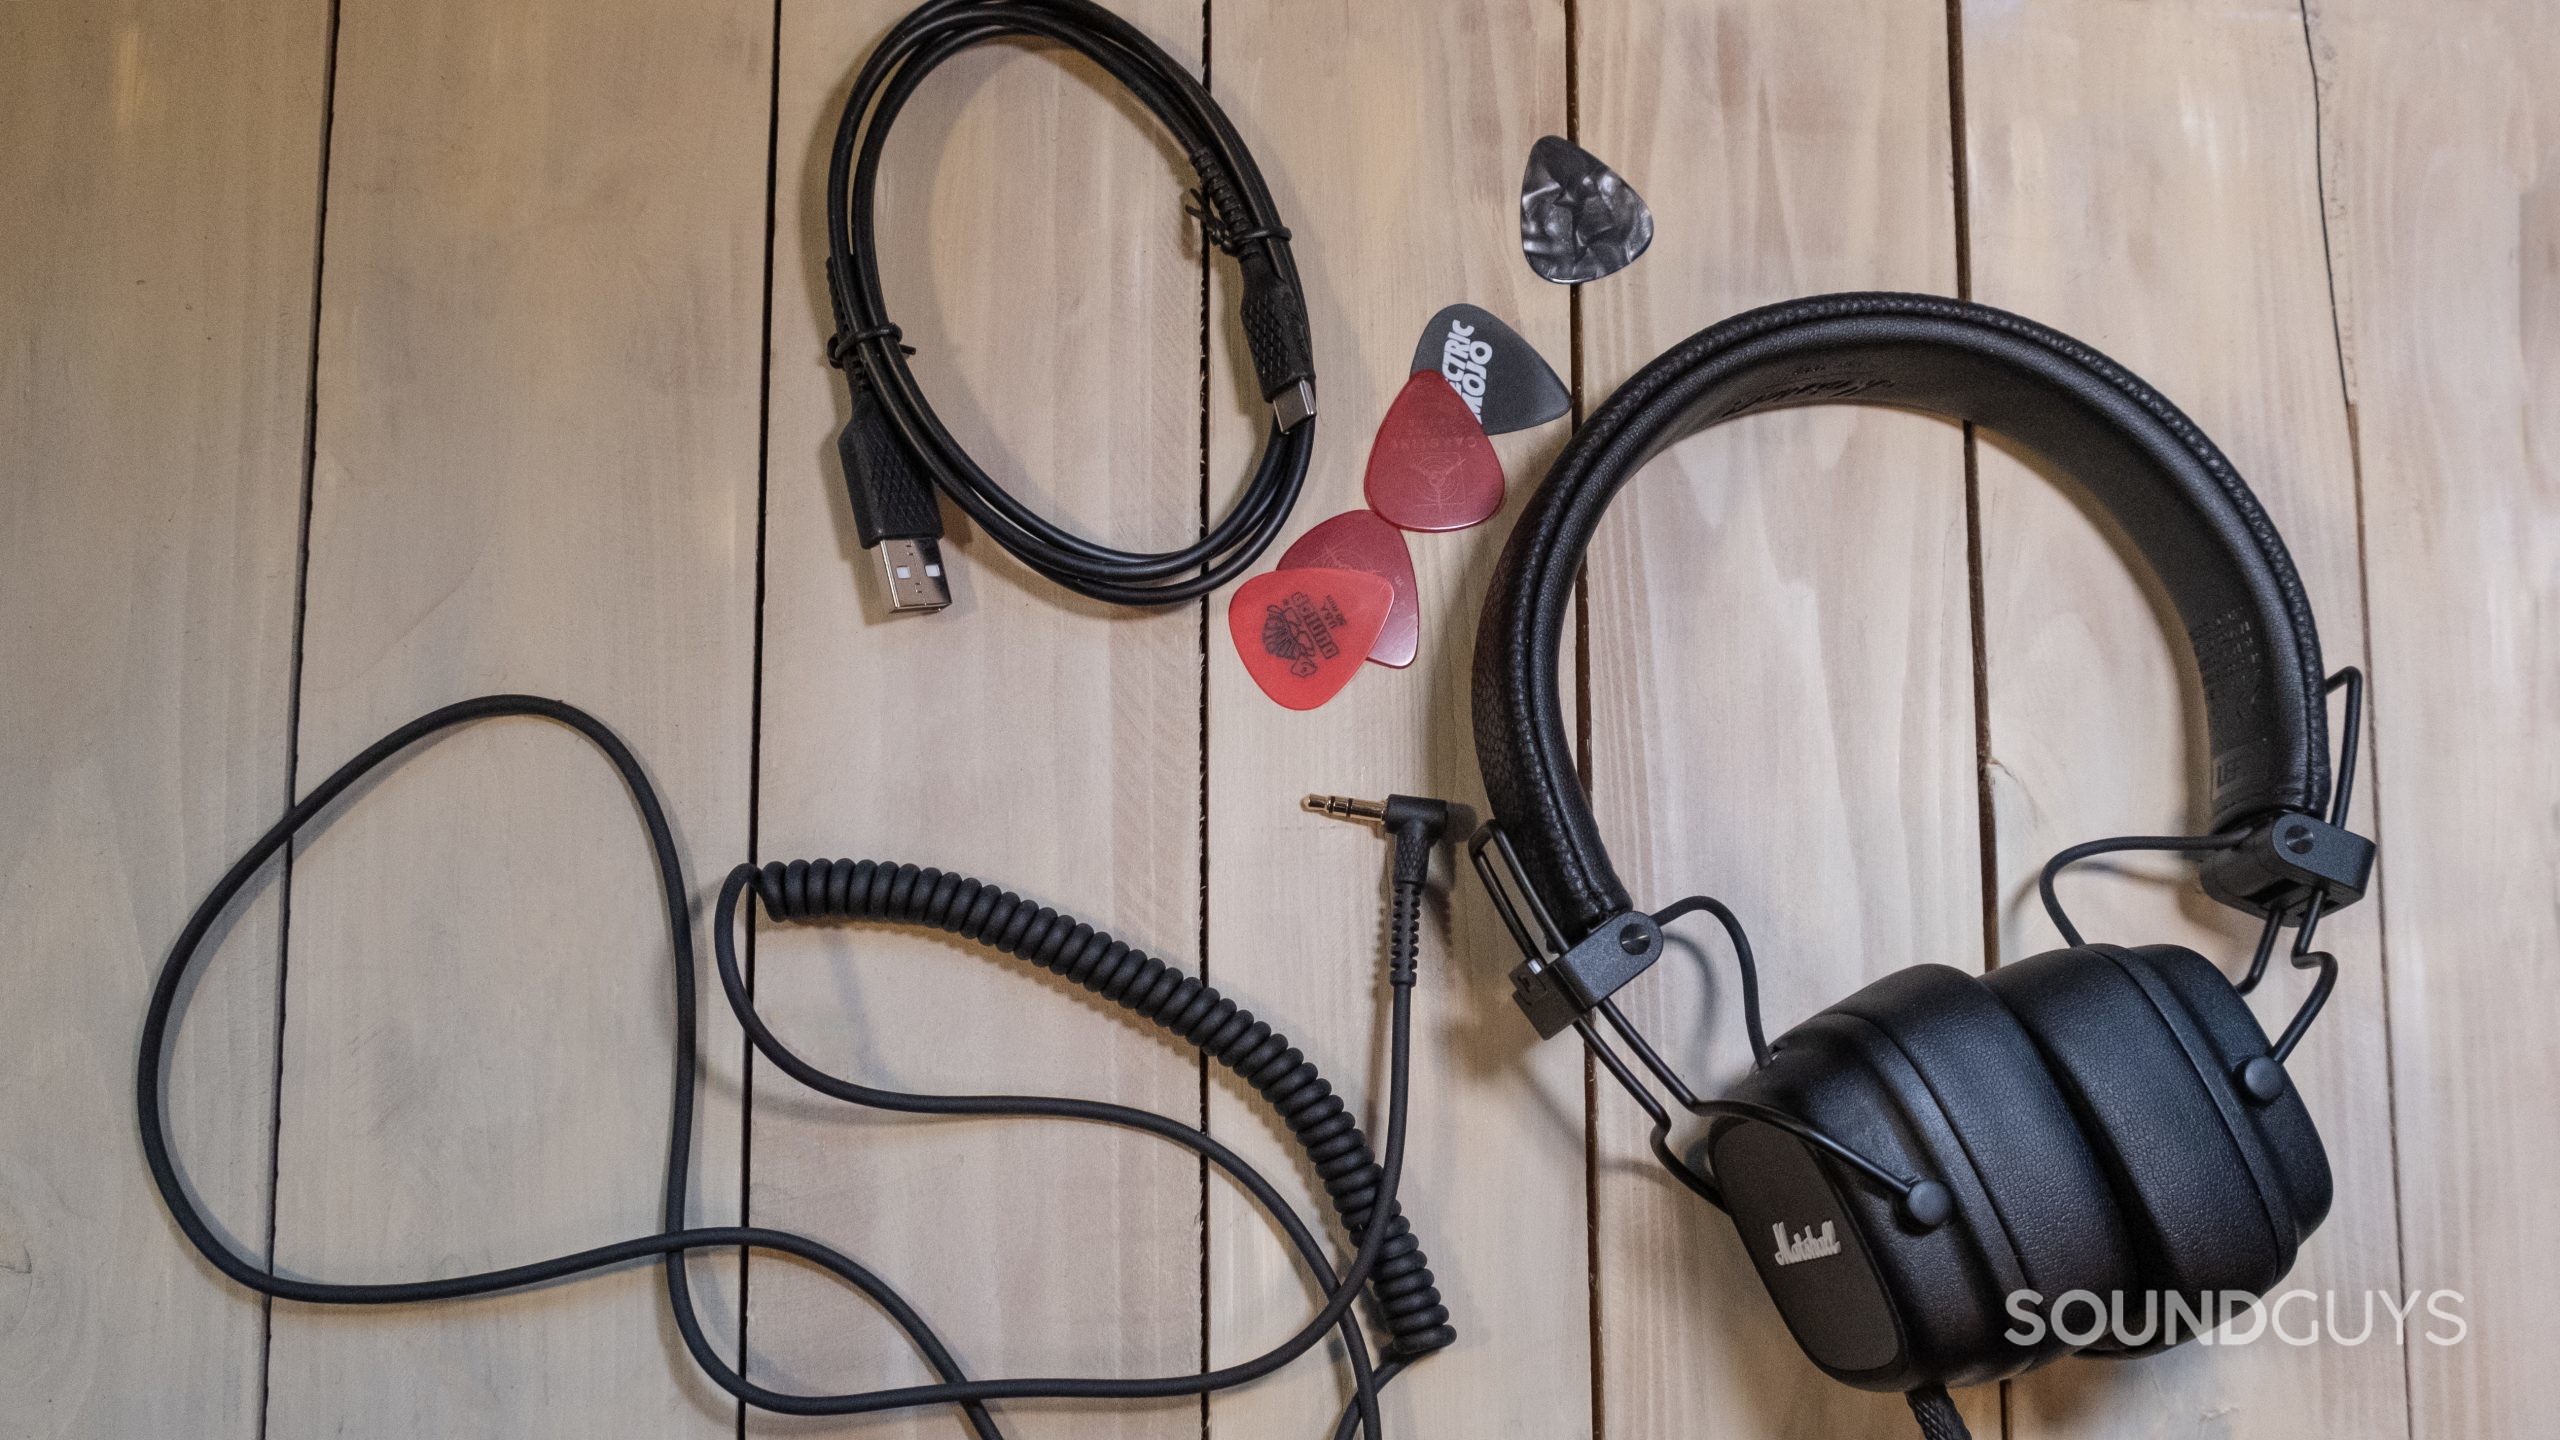 Marshall Major IV Headphone Review - Will They Rock Your World?